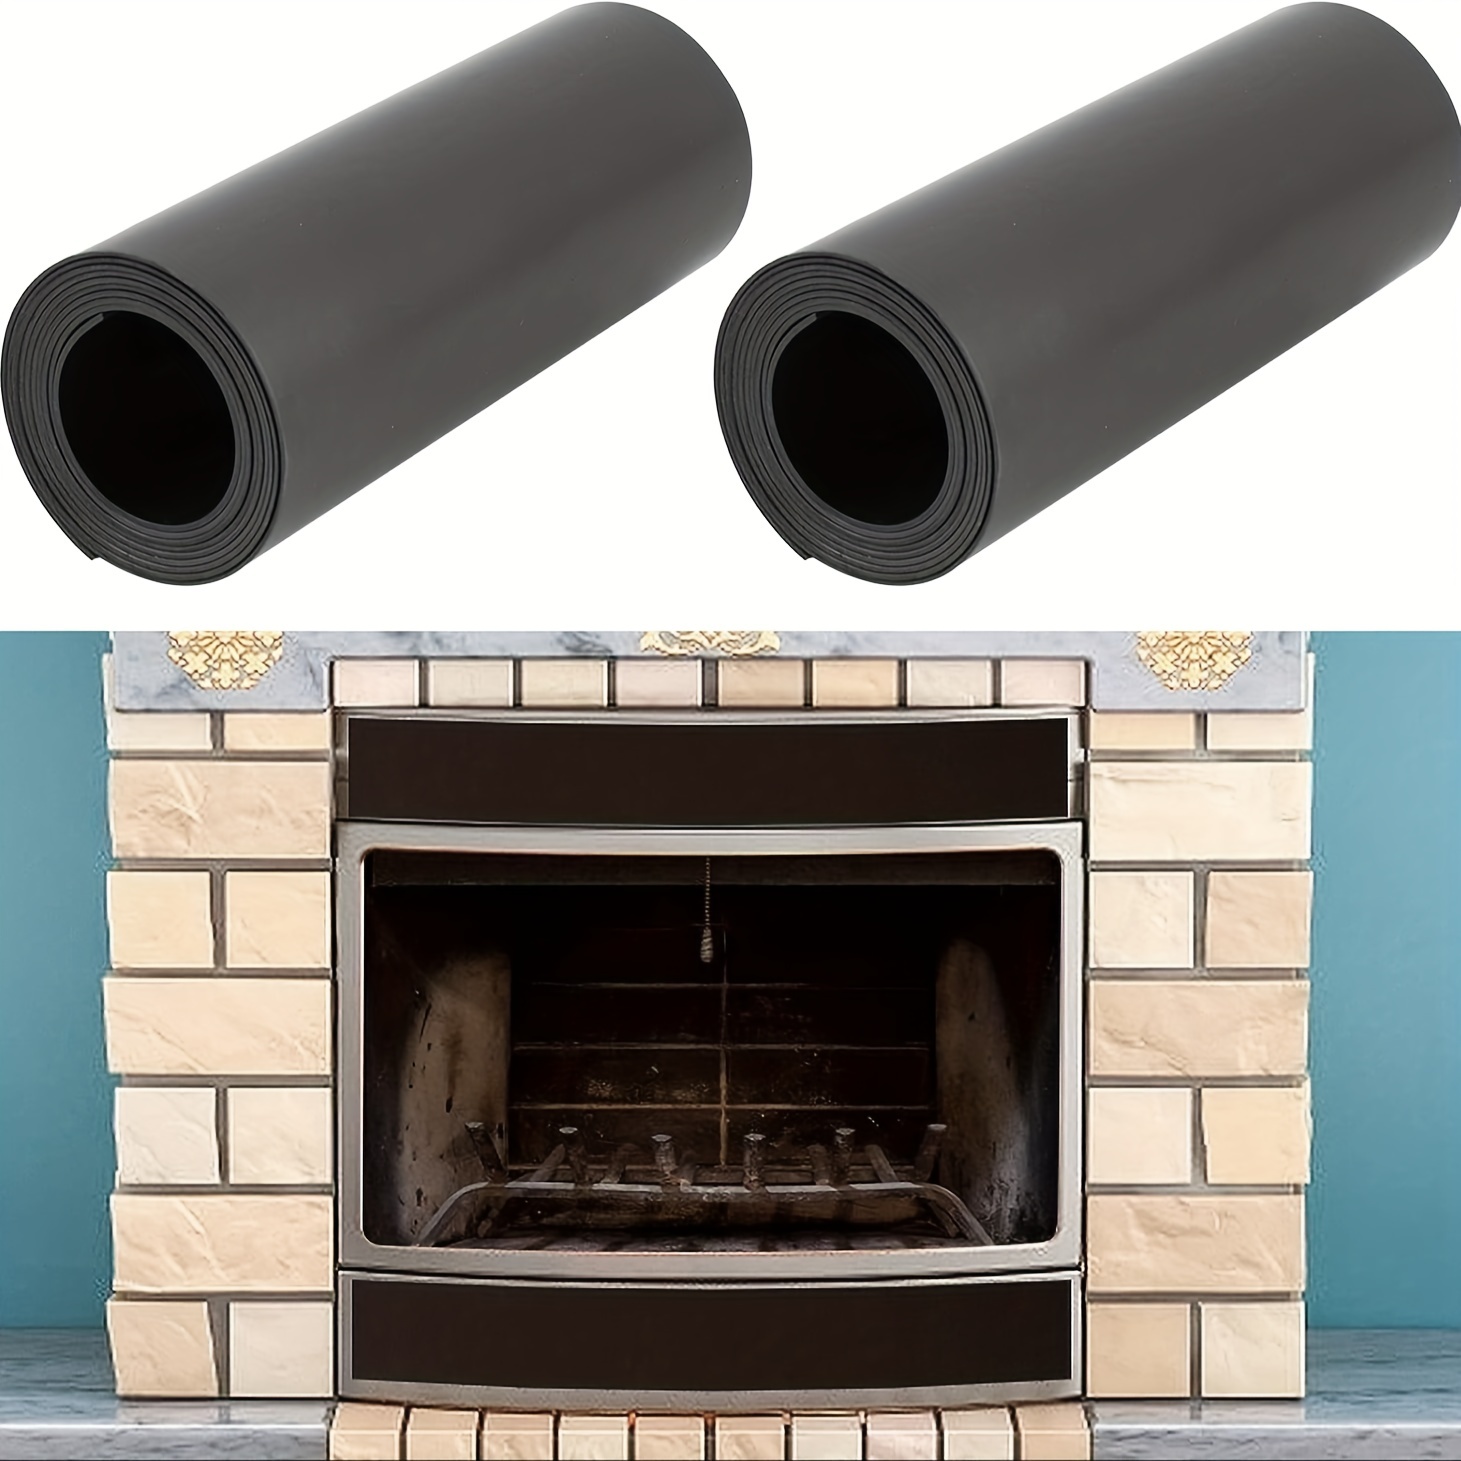 Fule Magnetic Fireplace Draft Stopper - Fireplace Cover to Block Cold Air  from Vent to Prevent Heat Loss - Magnet Fireplace Screen - Indoor Chimney  Draft Blocker Vent Covers- 40 x 6 